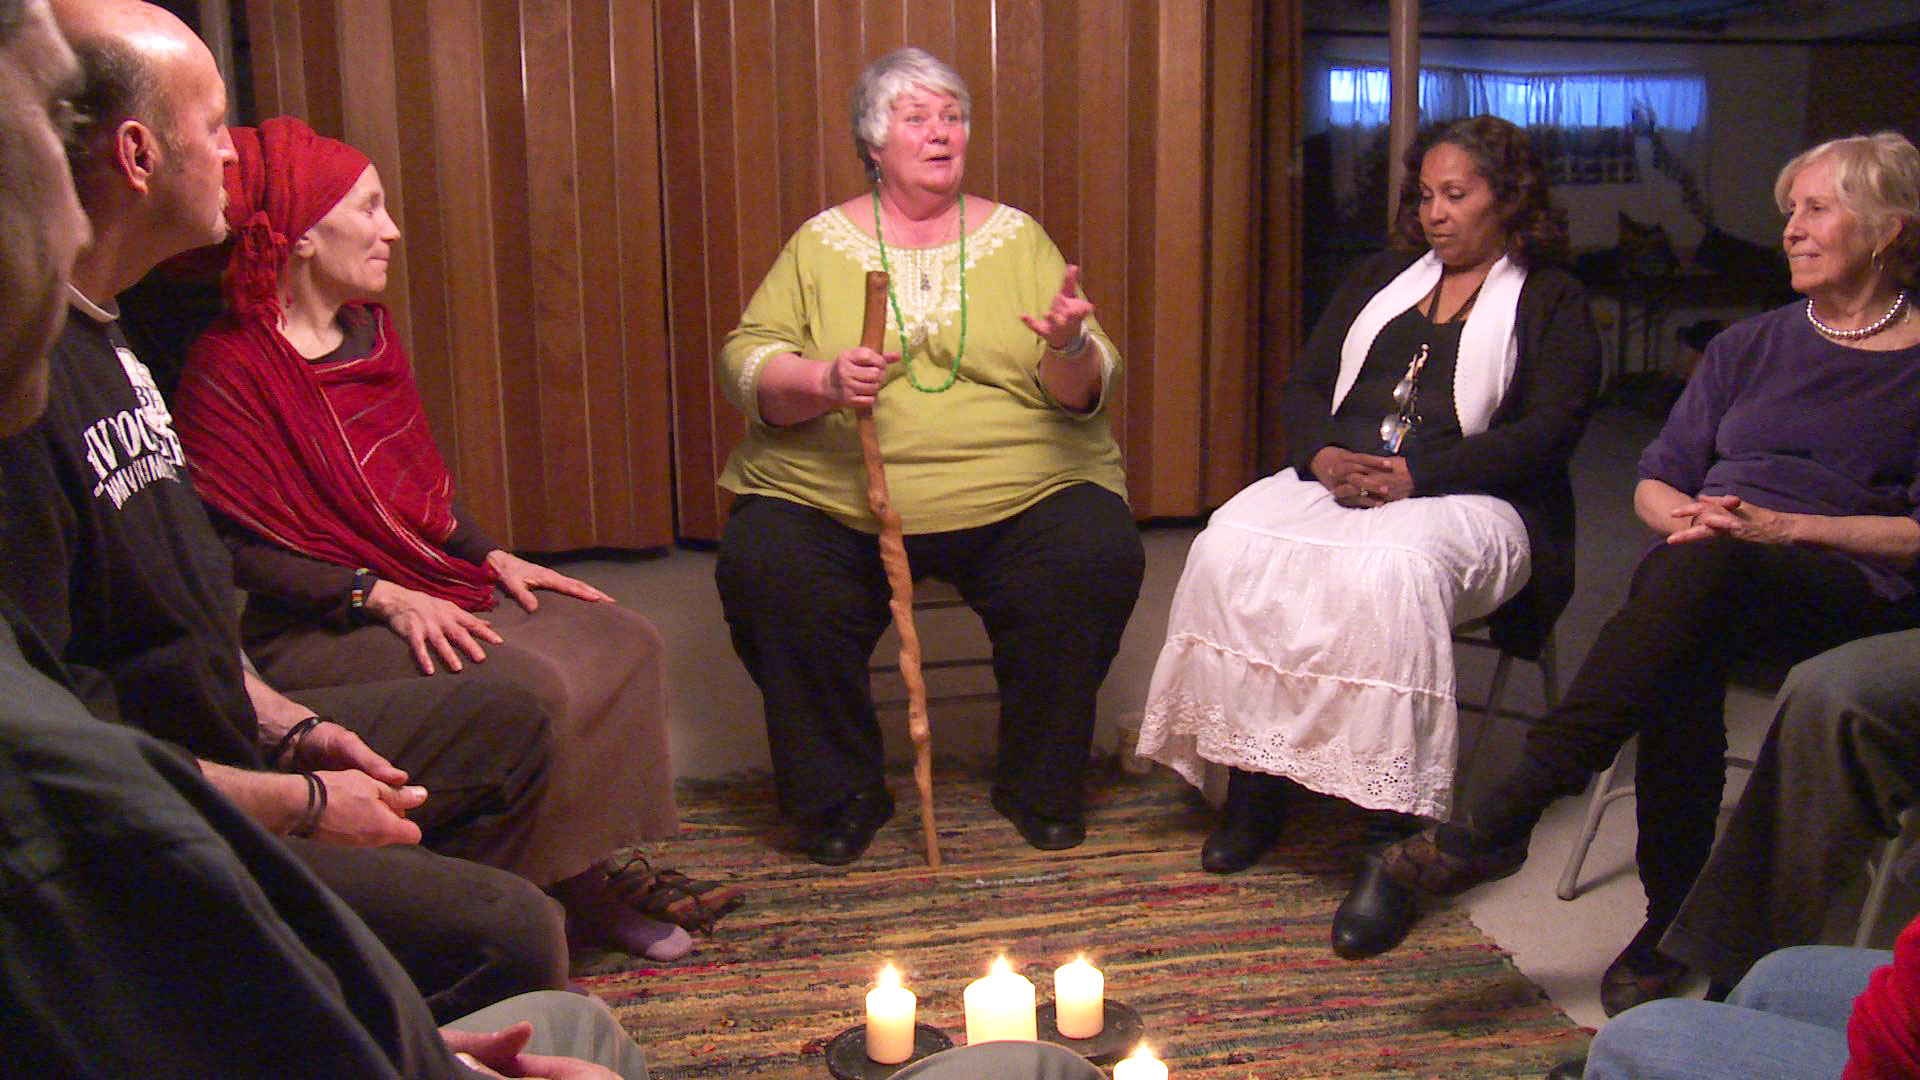 Group of seated adults, mostly women, in a circle. One woman speaks while holding a wooden cane. Lit candles adorn the center